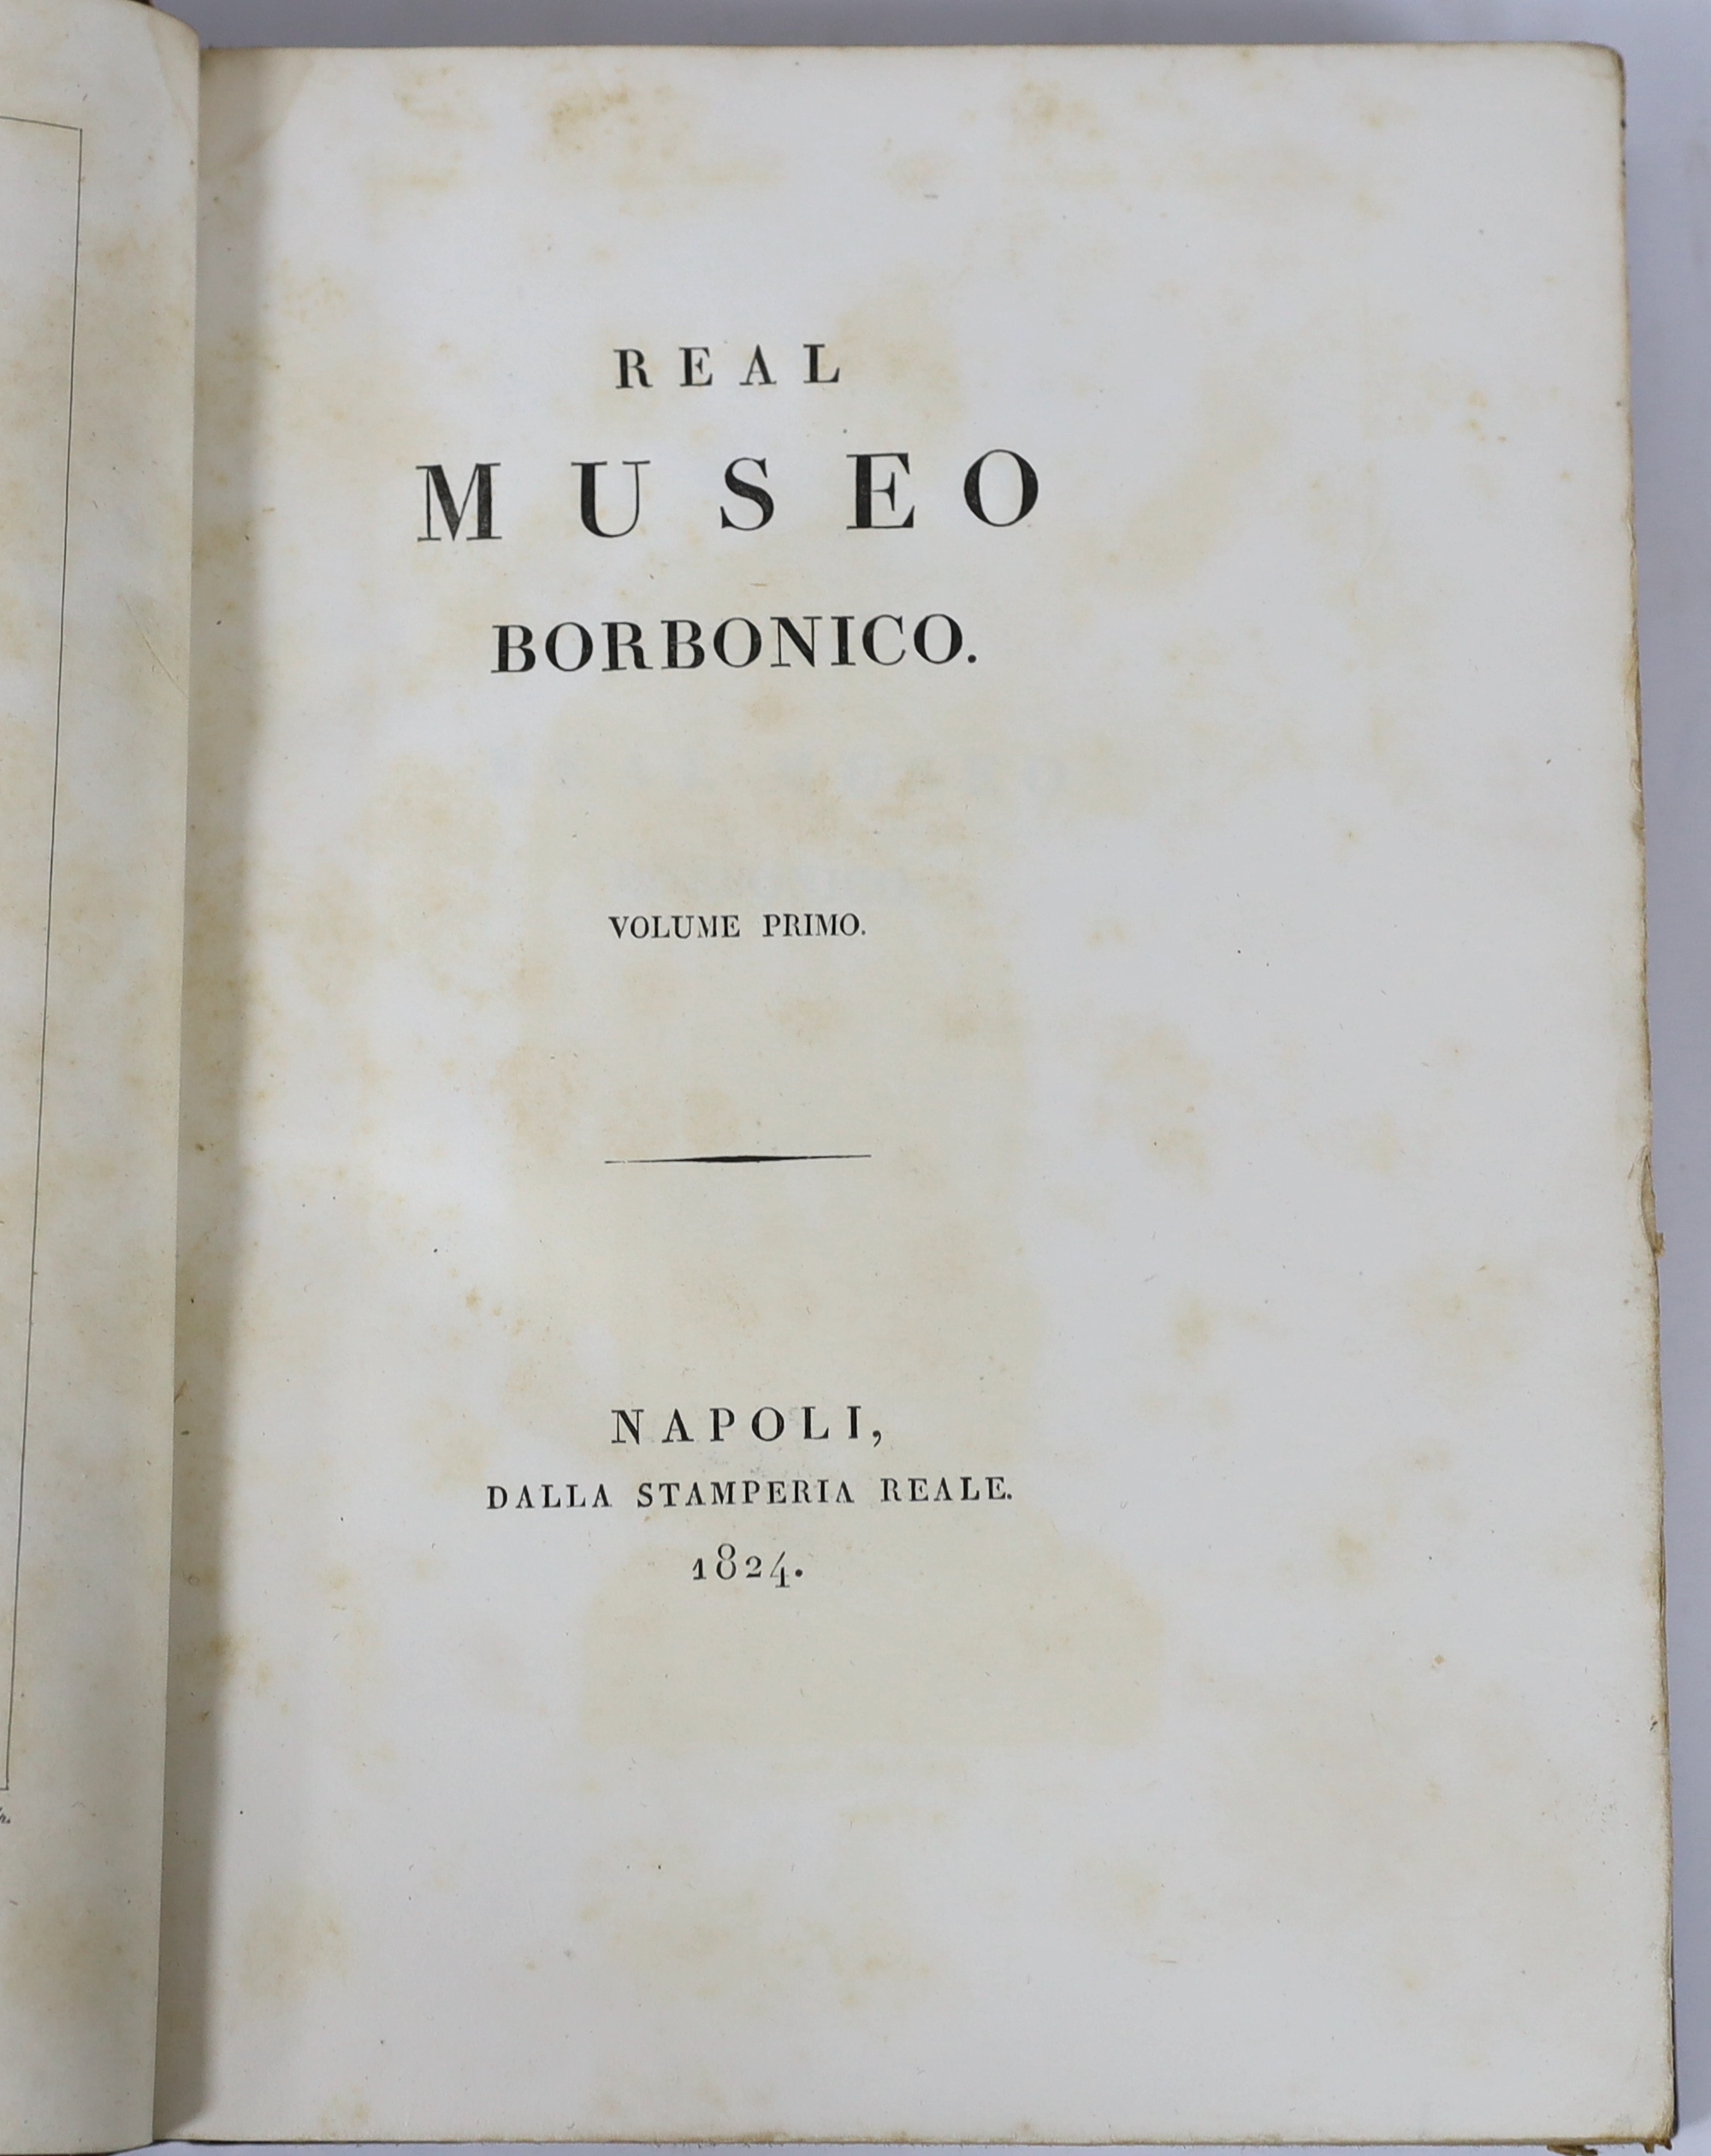 Real Museo Borbonico. vols. I-12 (only, ex 16). many engraved plates (some folded); mid 19th cent. gilt ruled maroon half morocco and cloth with panelled spines and gilt tops, 4to. Naples, 1824-39